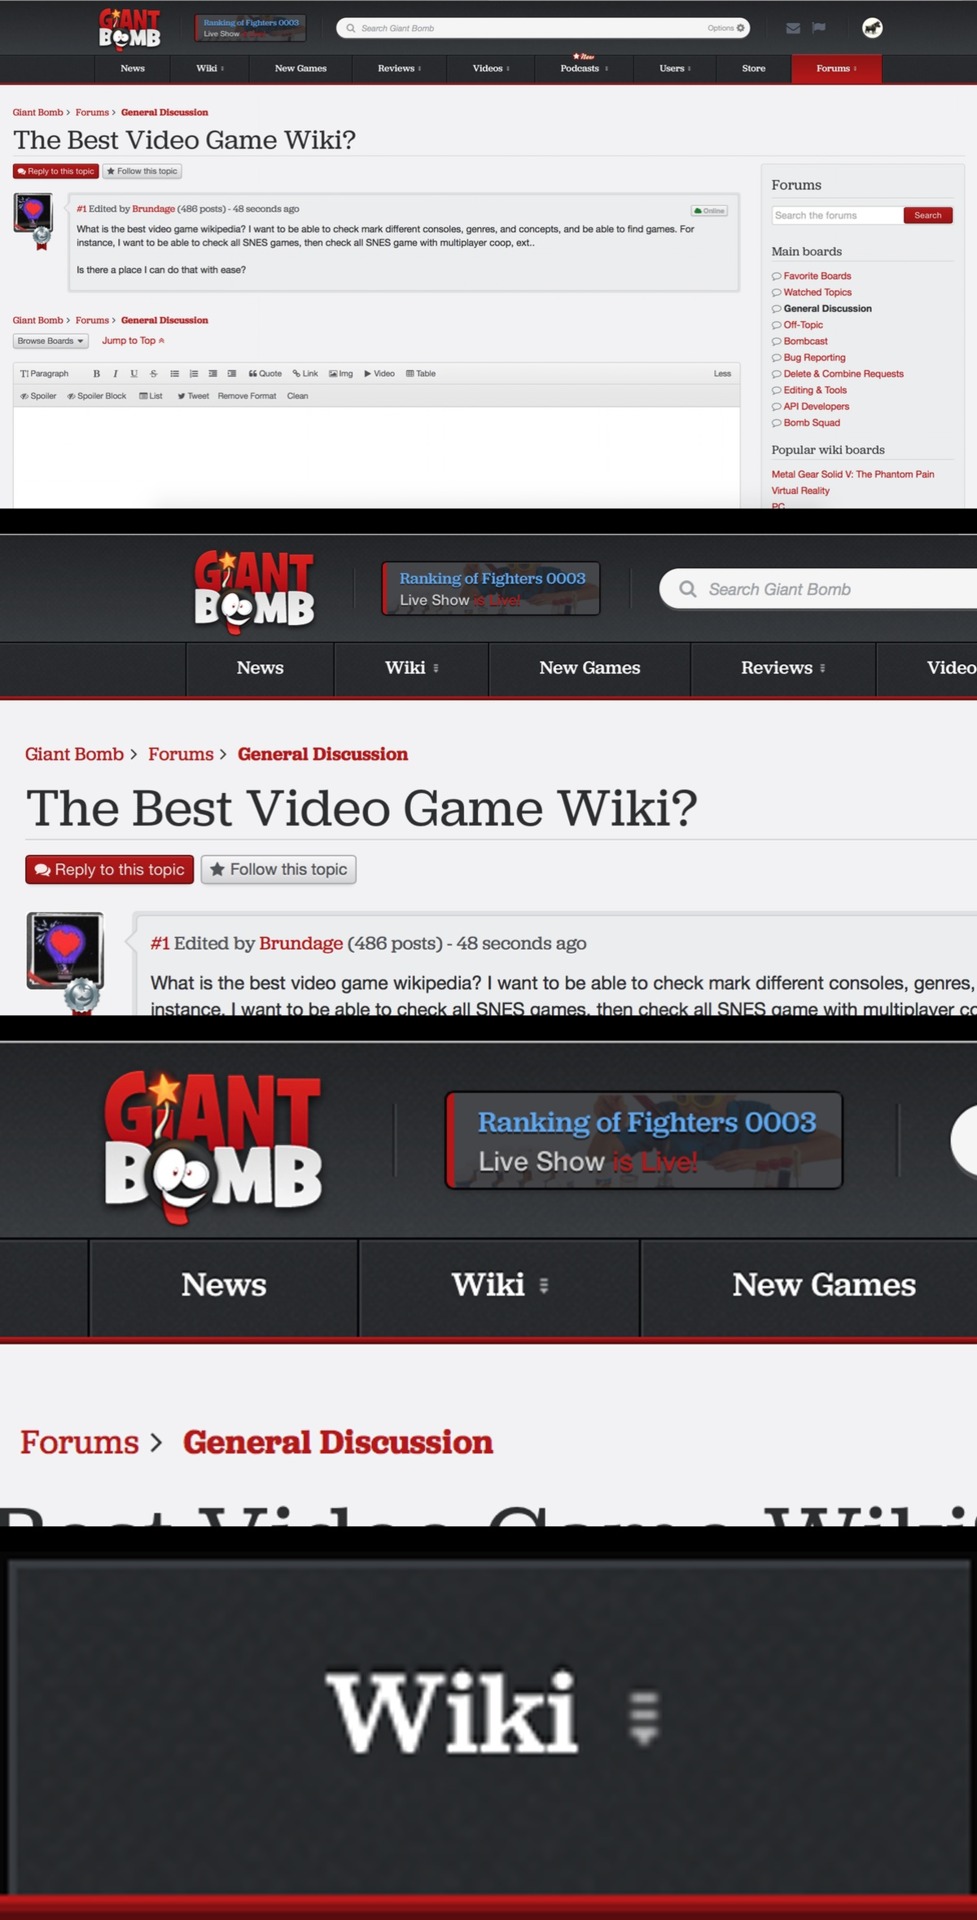 The Best Video Game Wiki? - General Discussion - Giant Bomb